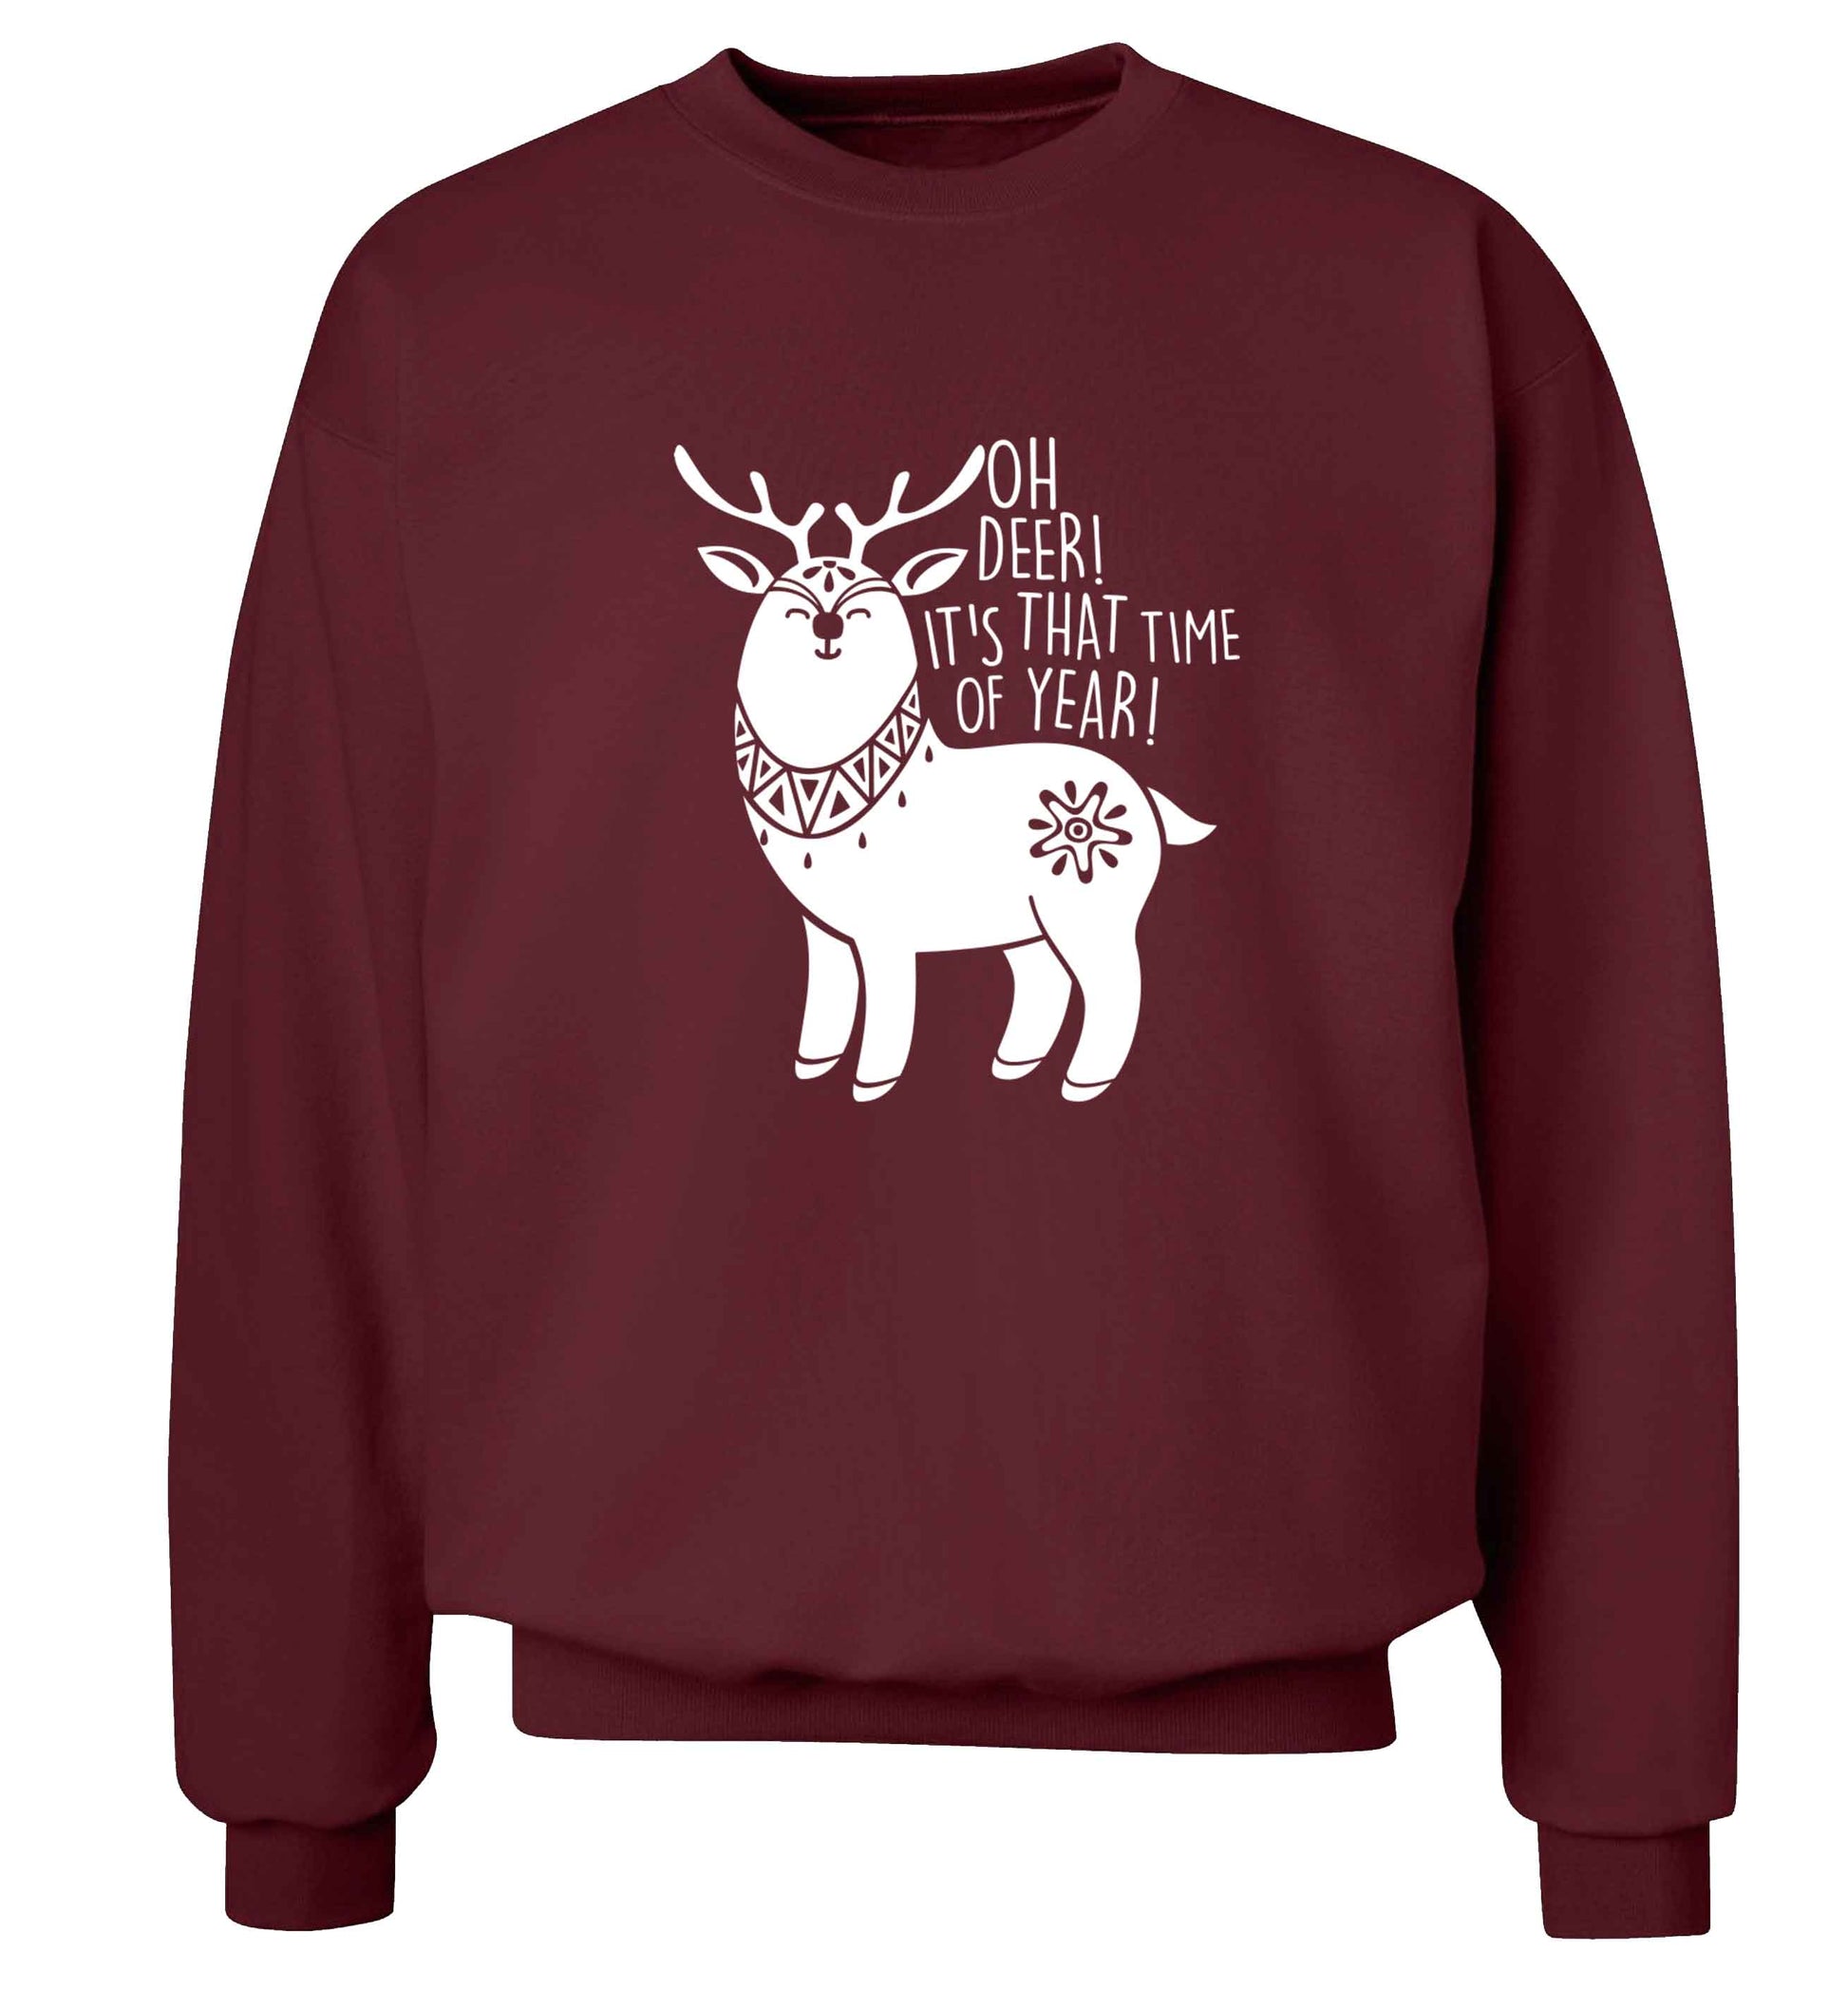 Oh dear it's that time of year Adult's unisex maroon Sweater 2XL